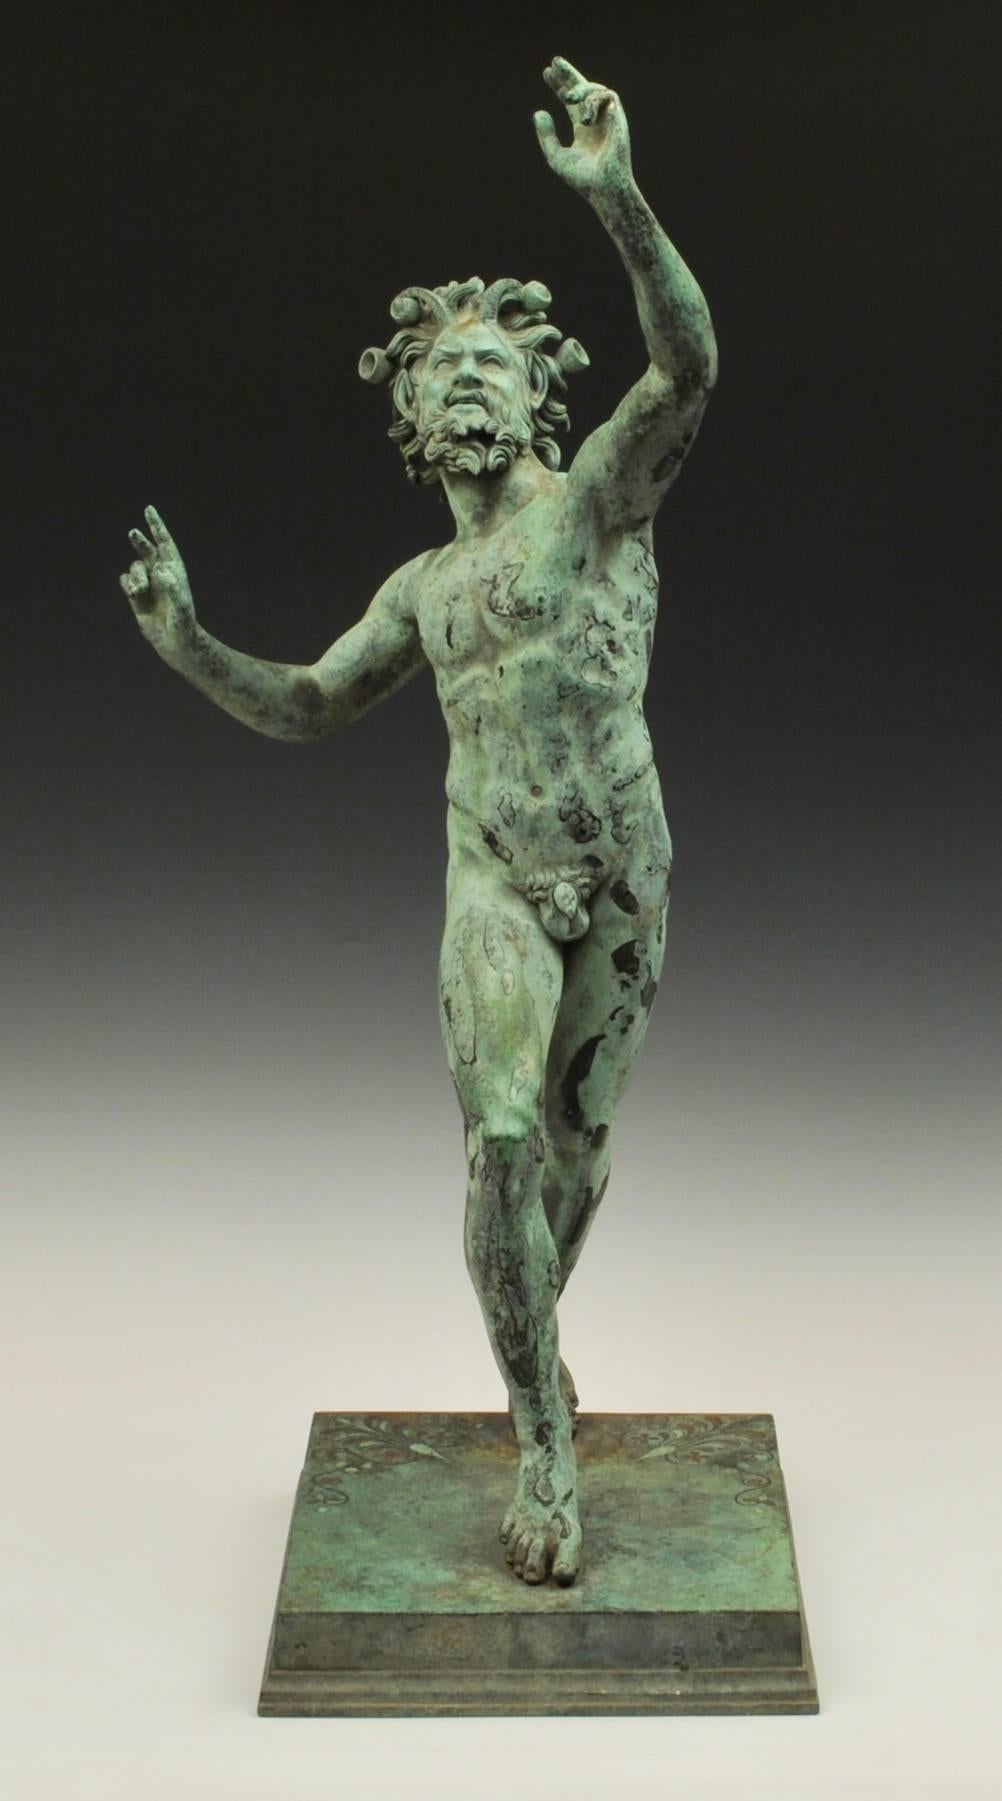 A fine quality 19th century Grand Tour bronze of the dancing faun of Pompeii, the casting and chiselling is very fine and the base incised with decoration.